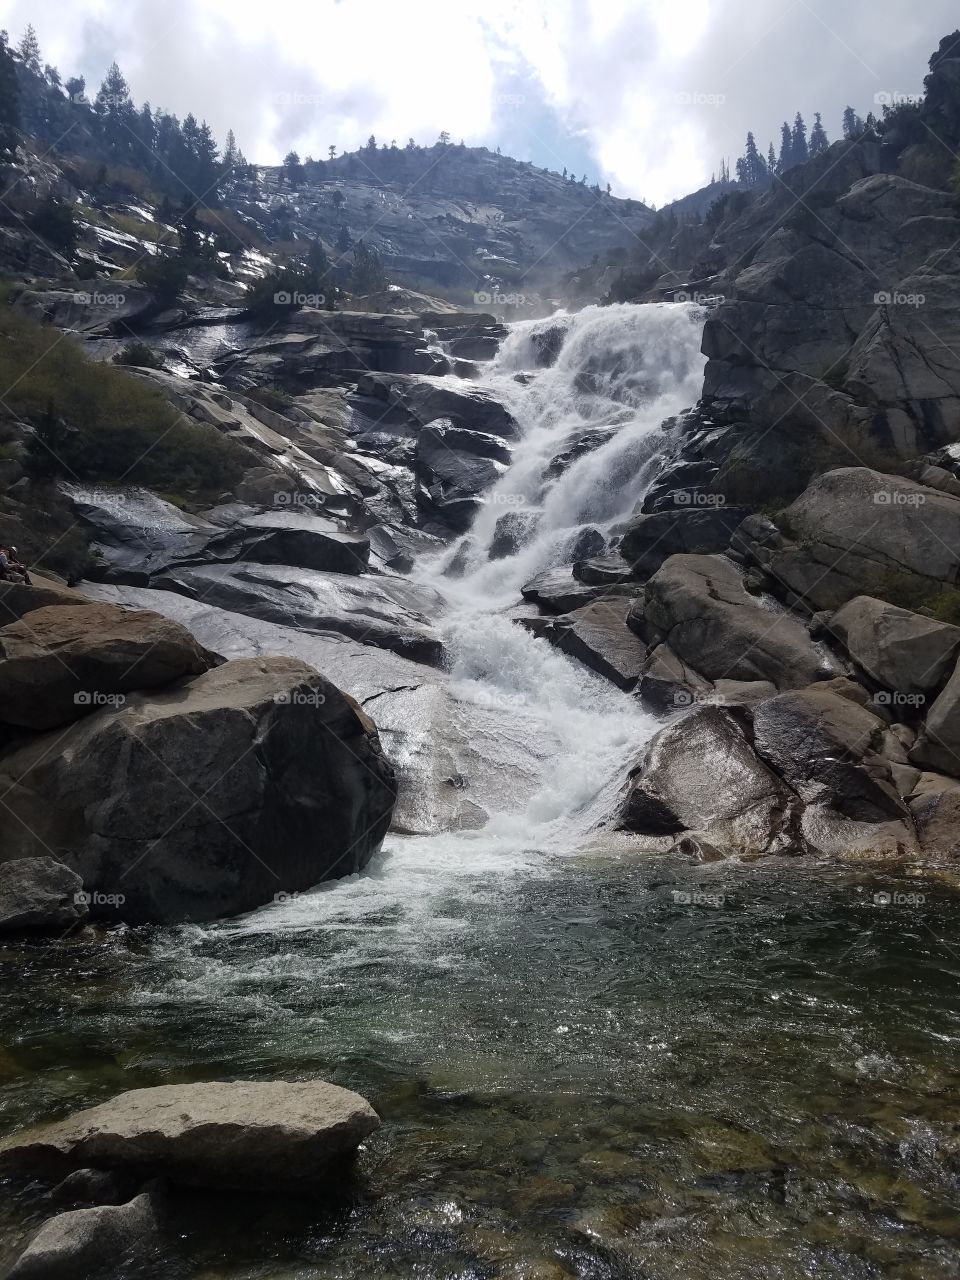 Waterfall in the mountains